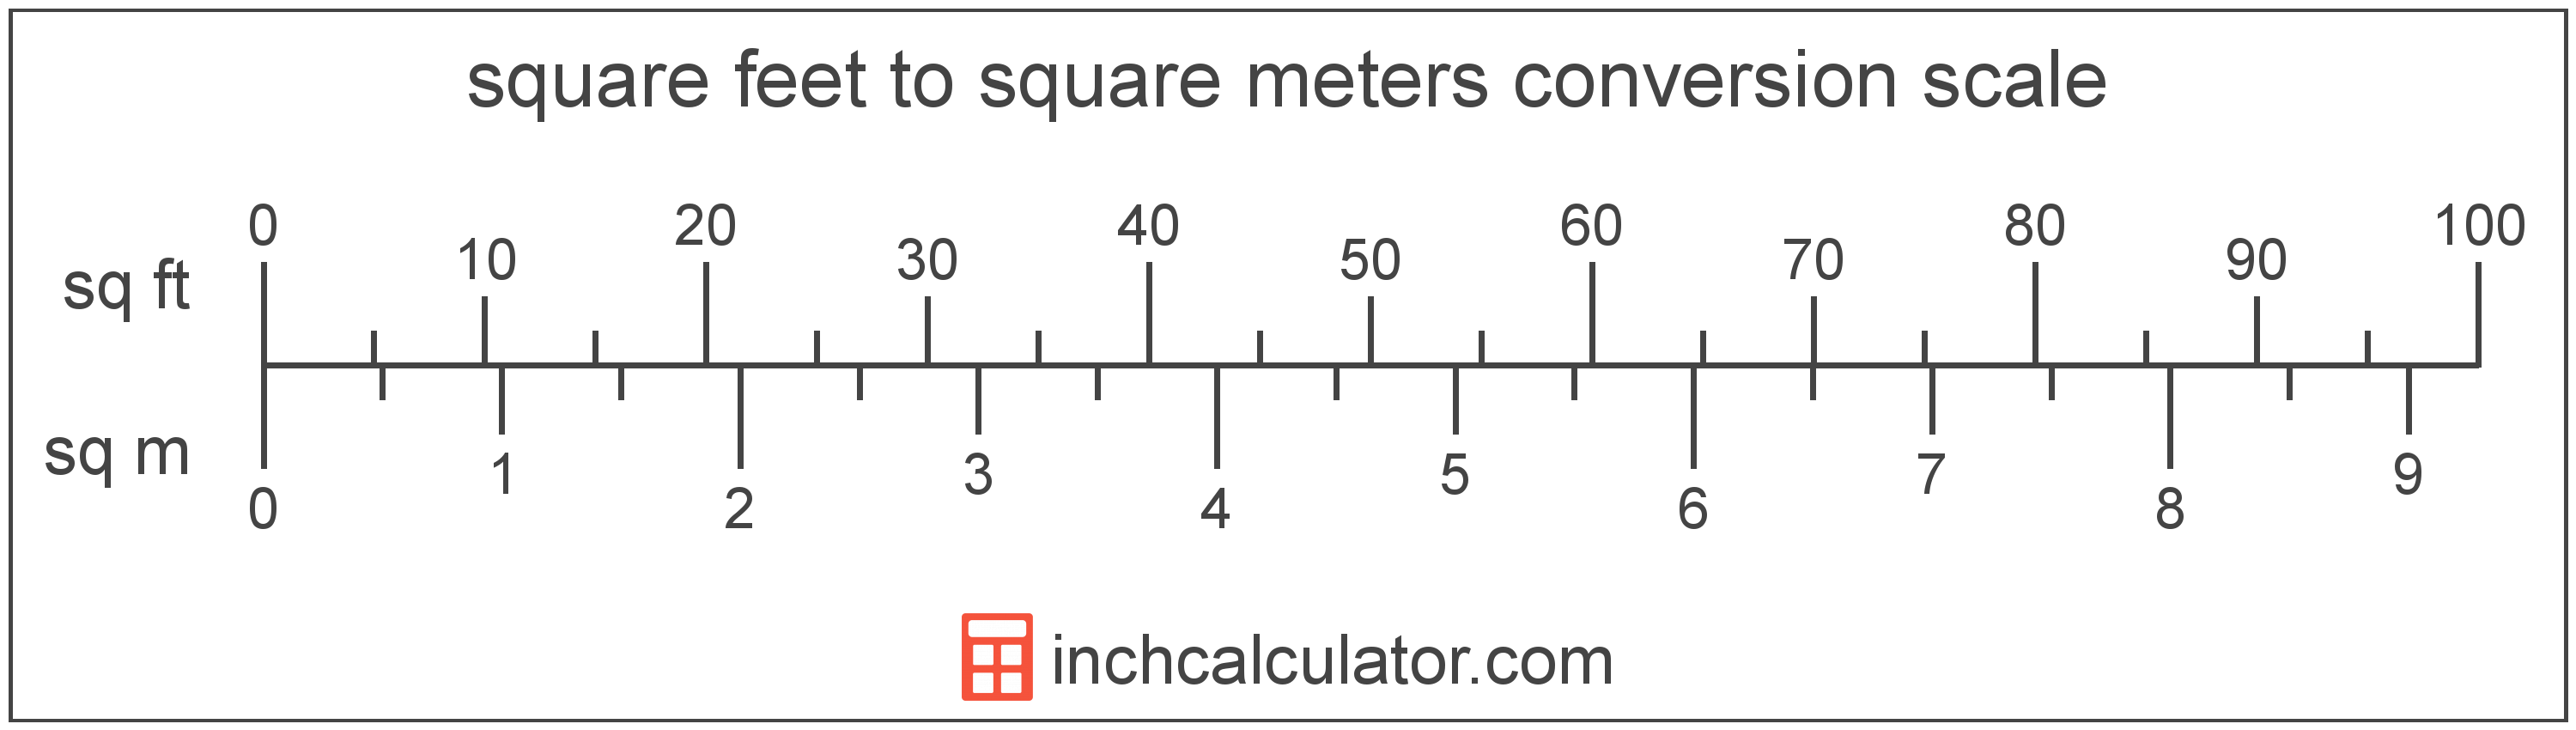 conversion scale showing square meters and equivalent square feet area values